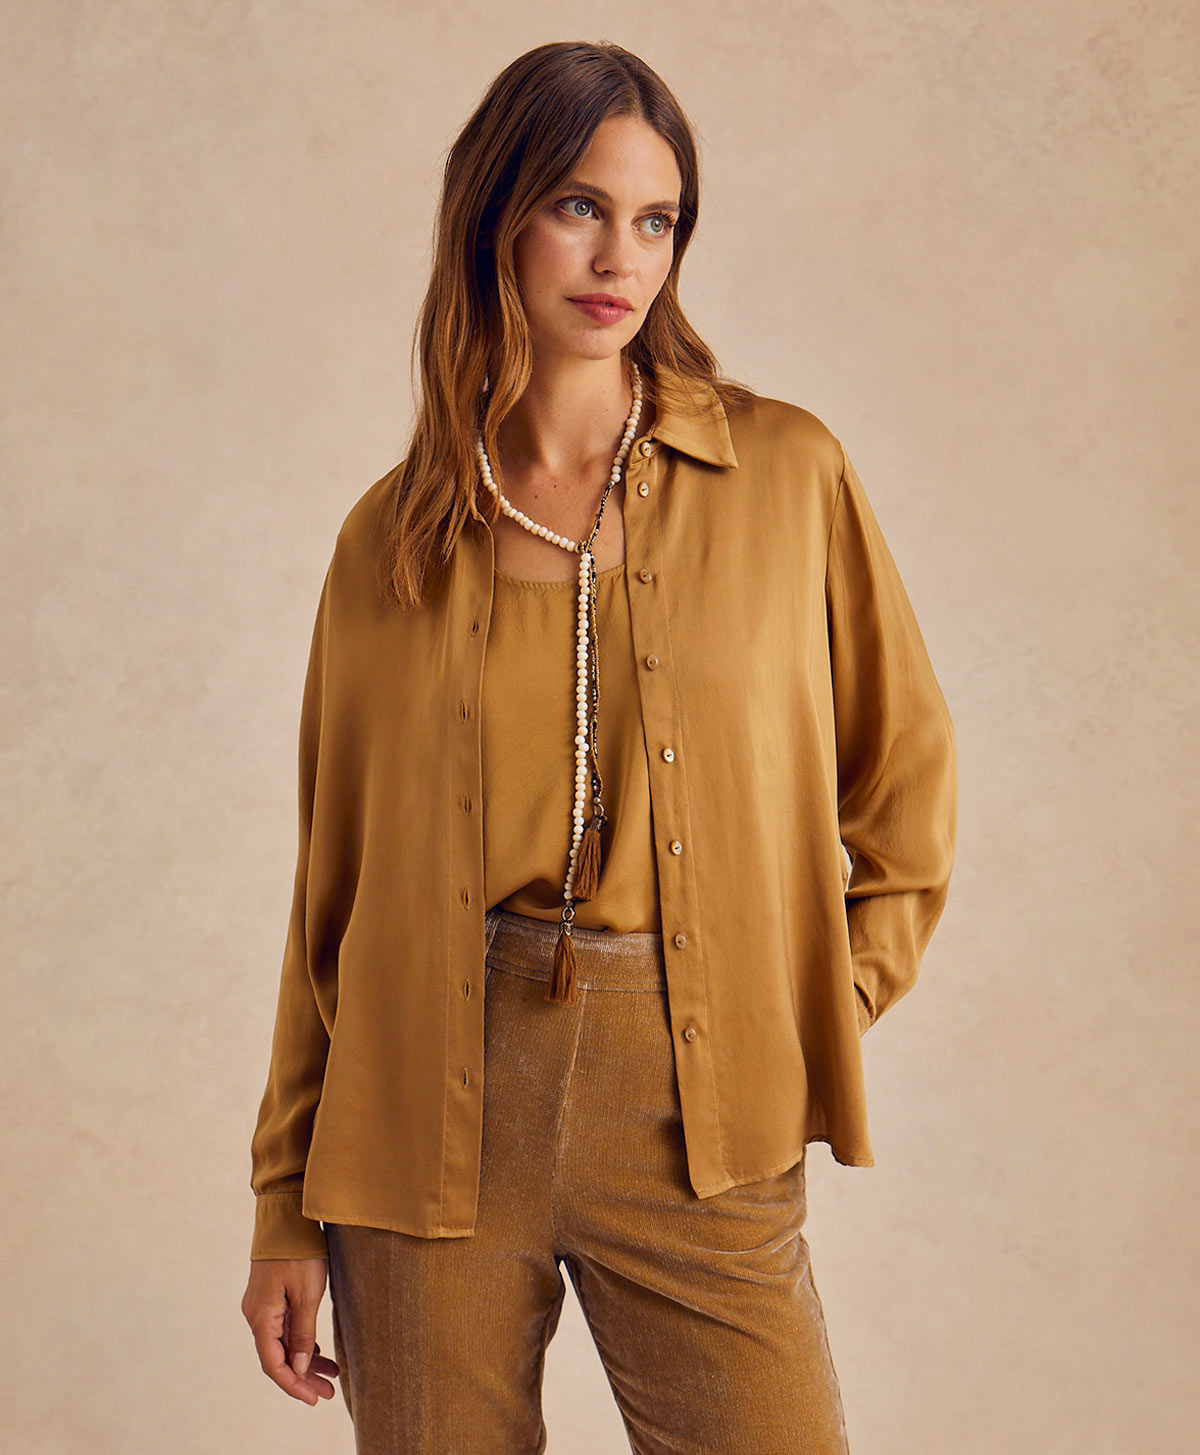 ARLES BIS SHIRT IN SOLID COLOUR SATIN CREPE - GOLD - Momonì